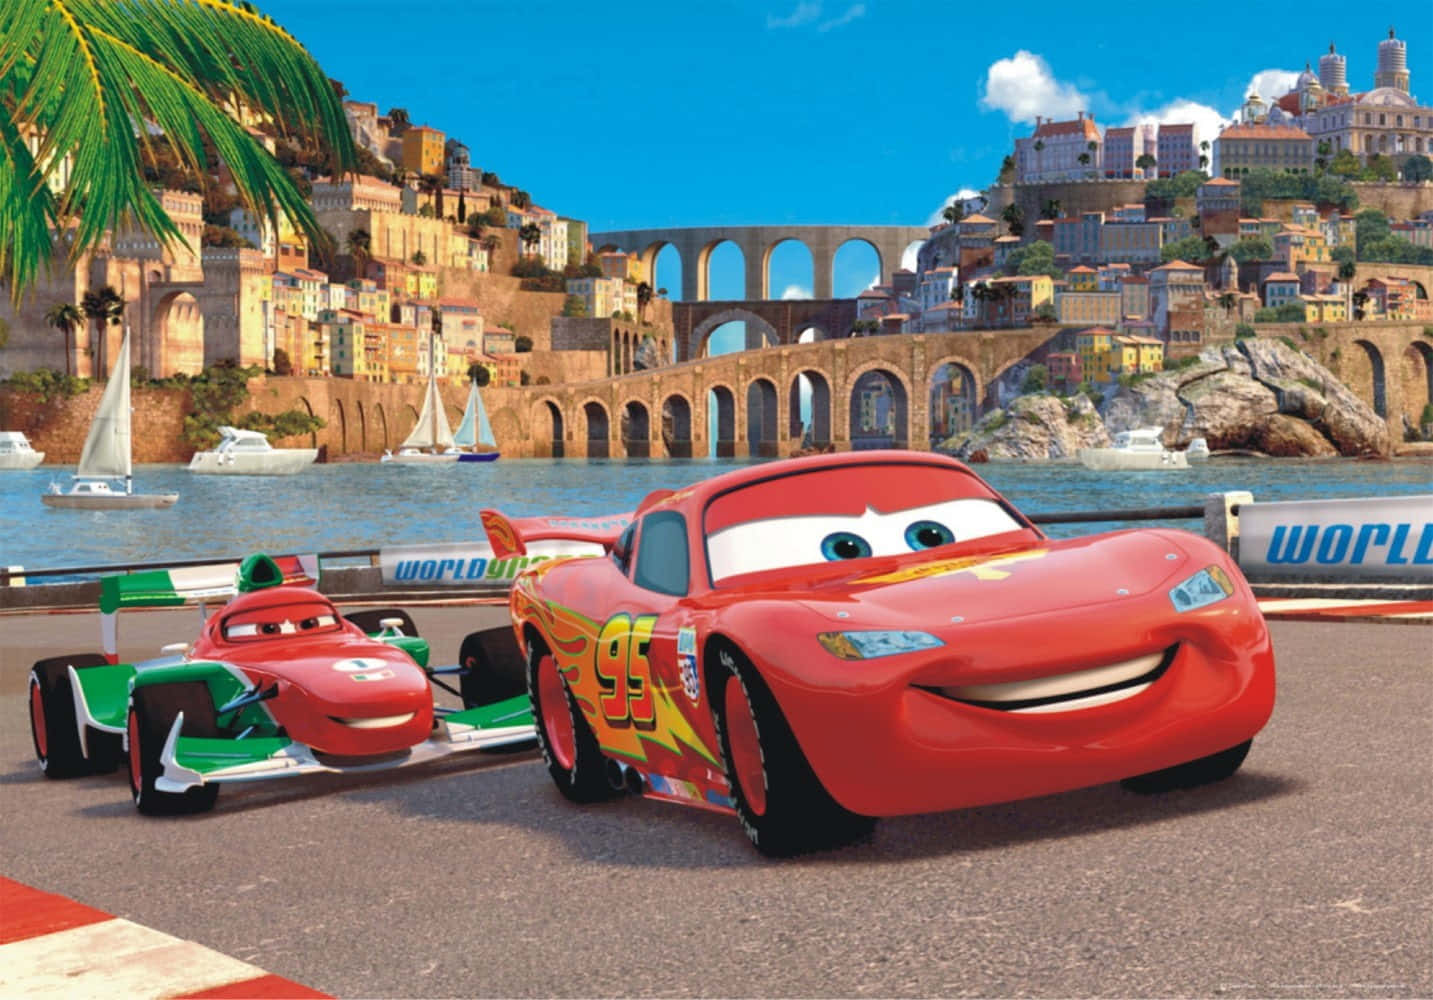 Lightning McQueen racing down the track in full speed